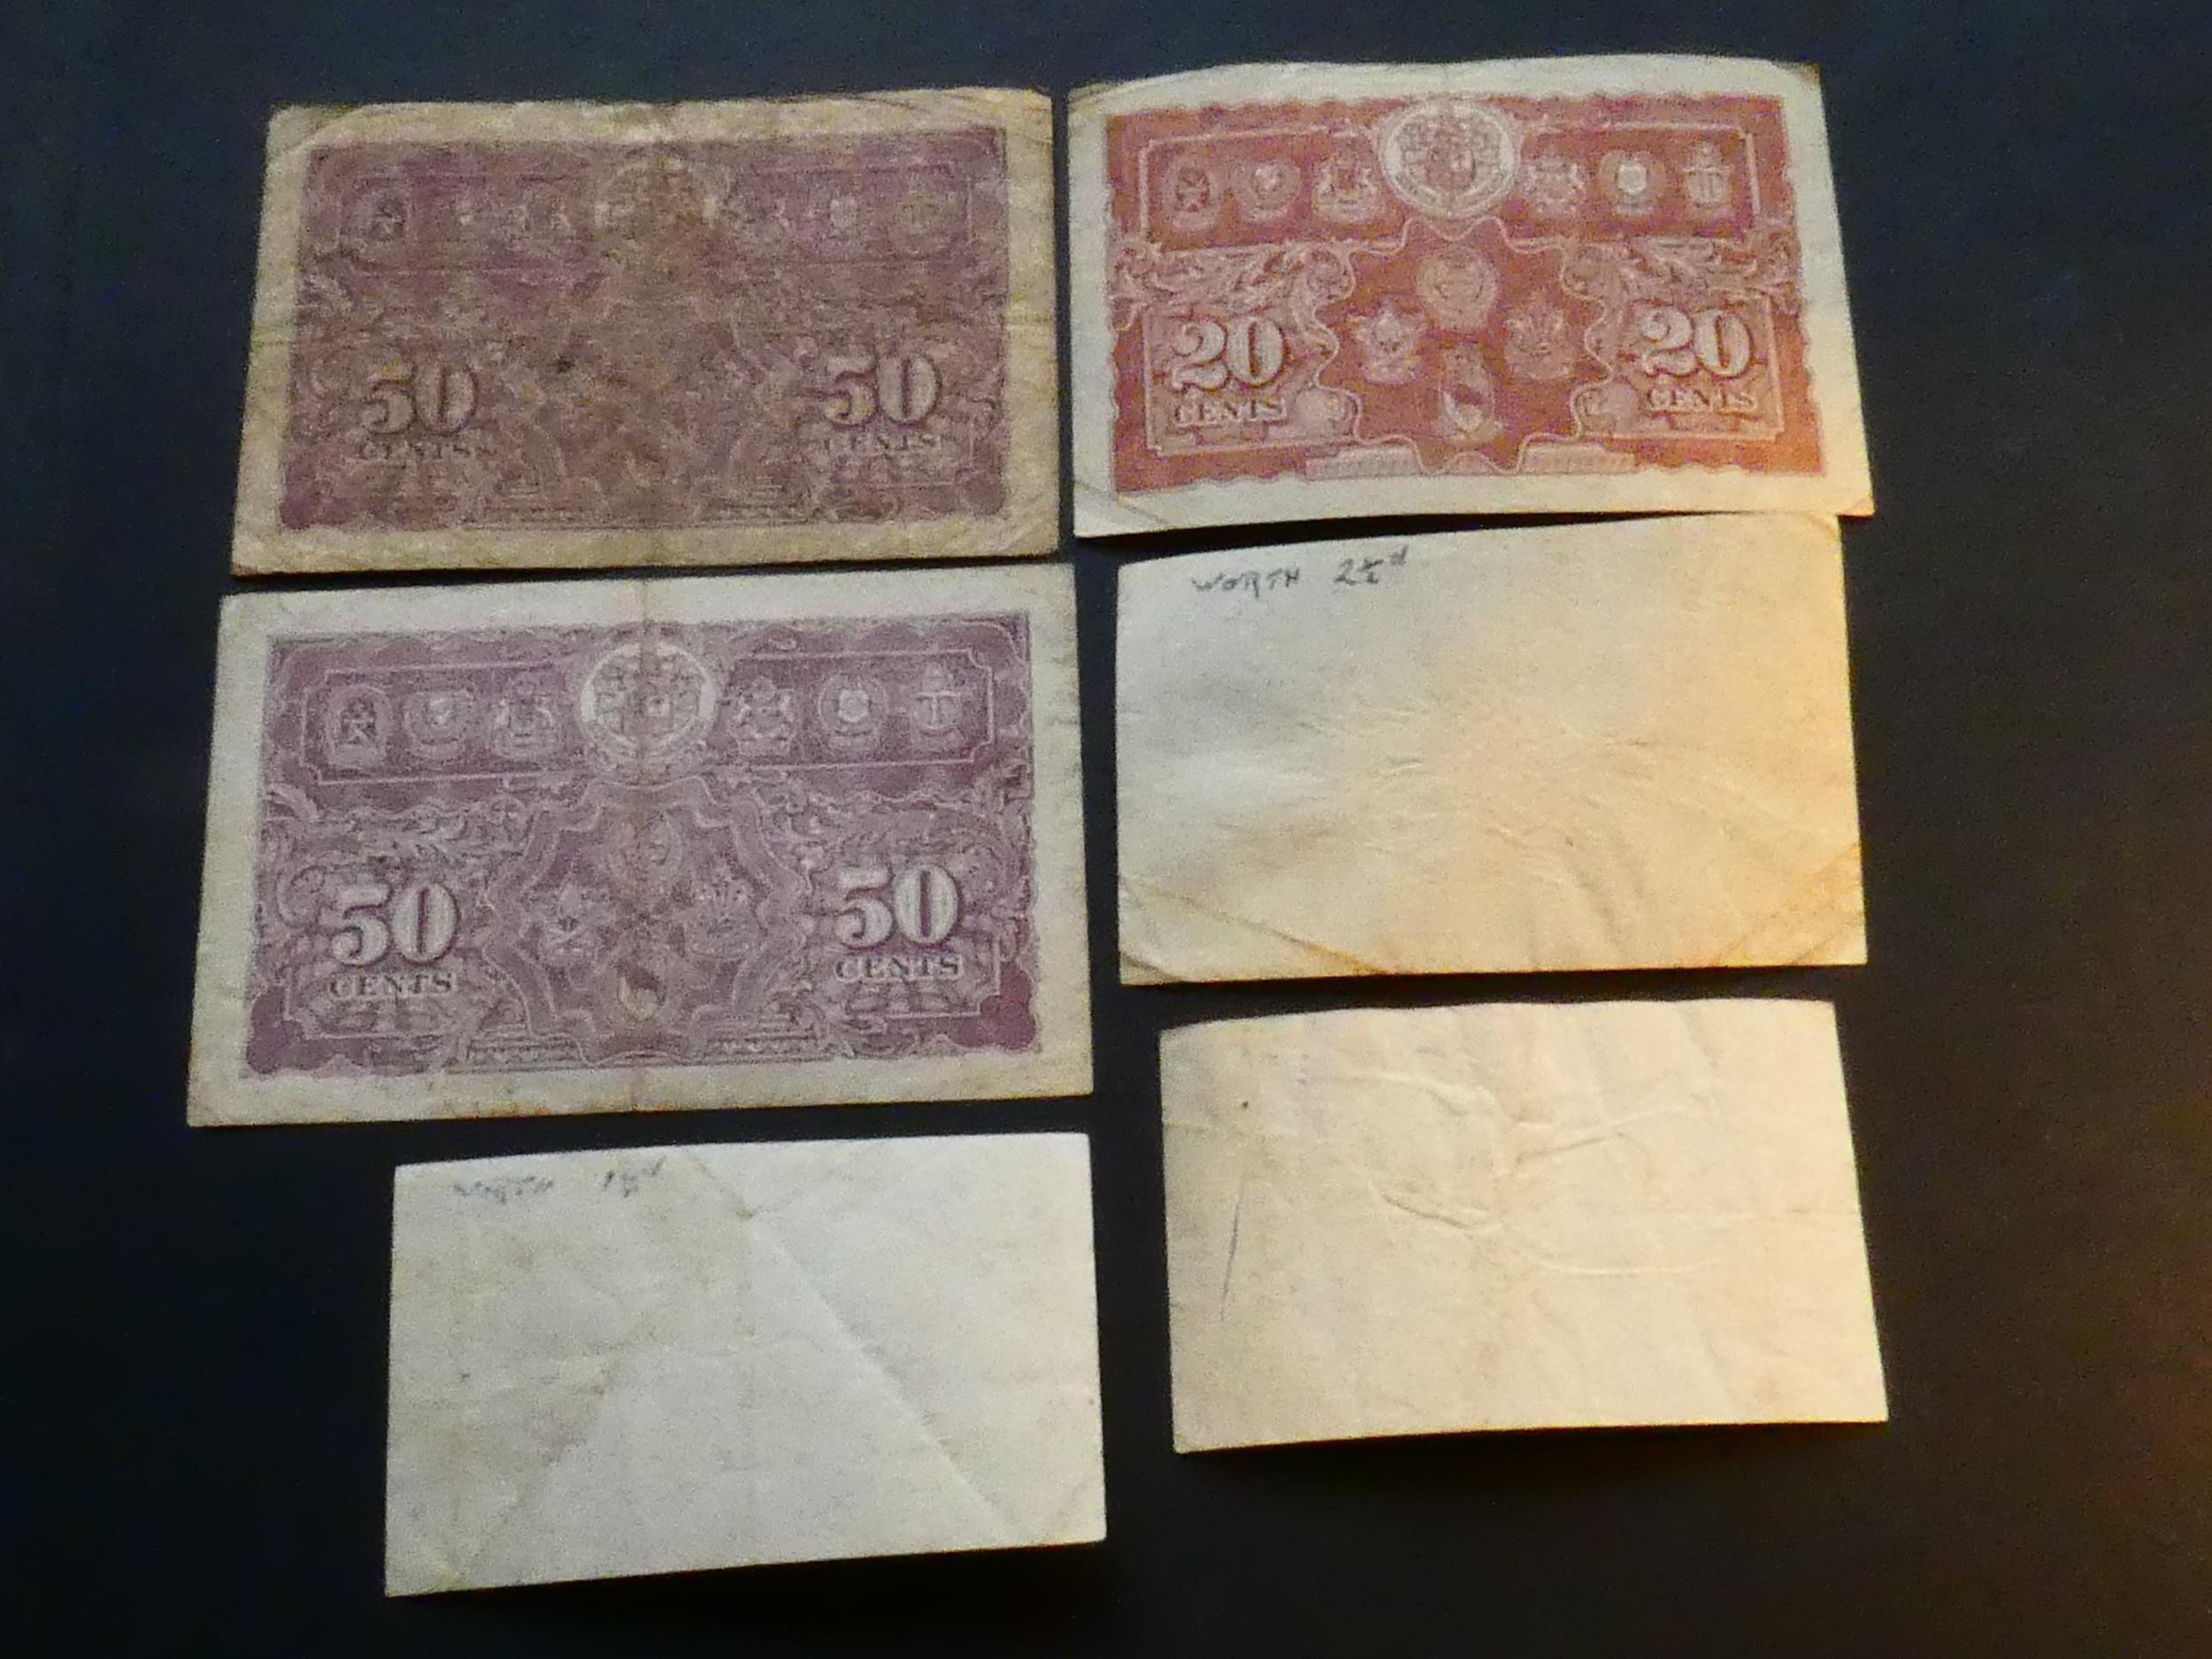 MALAYA. 2x 5 Cents (P-7b), 10c (P-8), 20c (P-9a) and 50c (P-10a & P-10b), all dated 1.7.1941, VG to